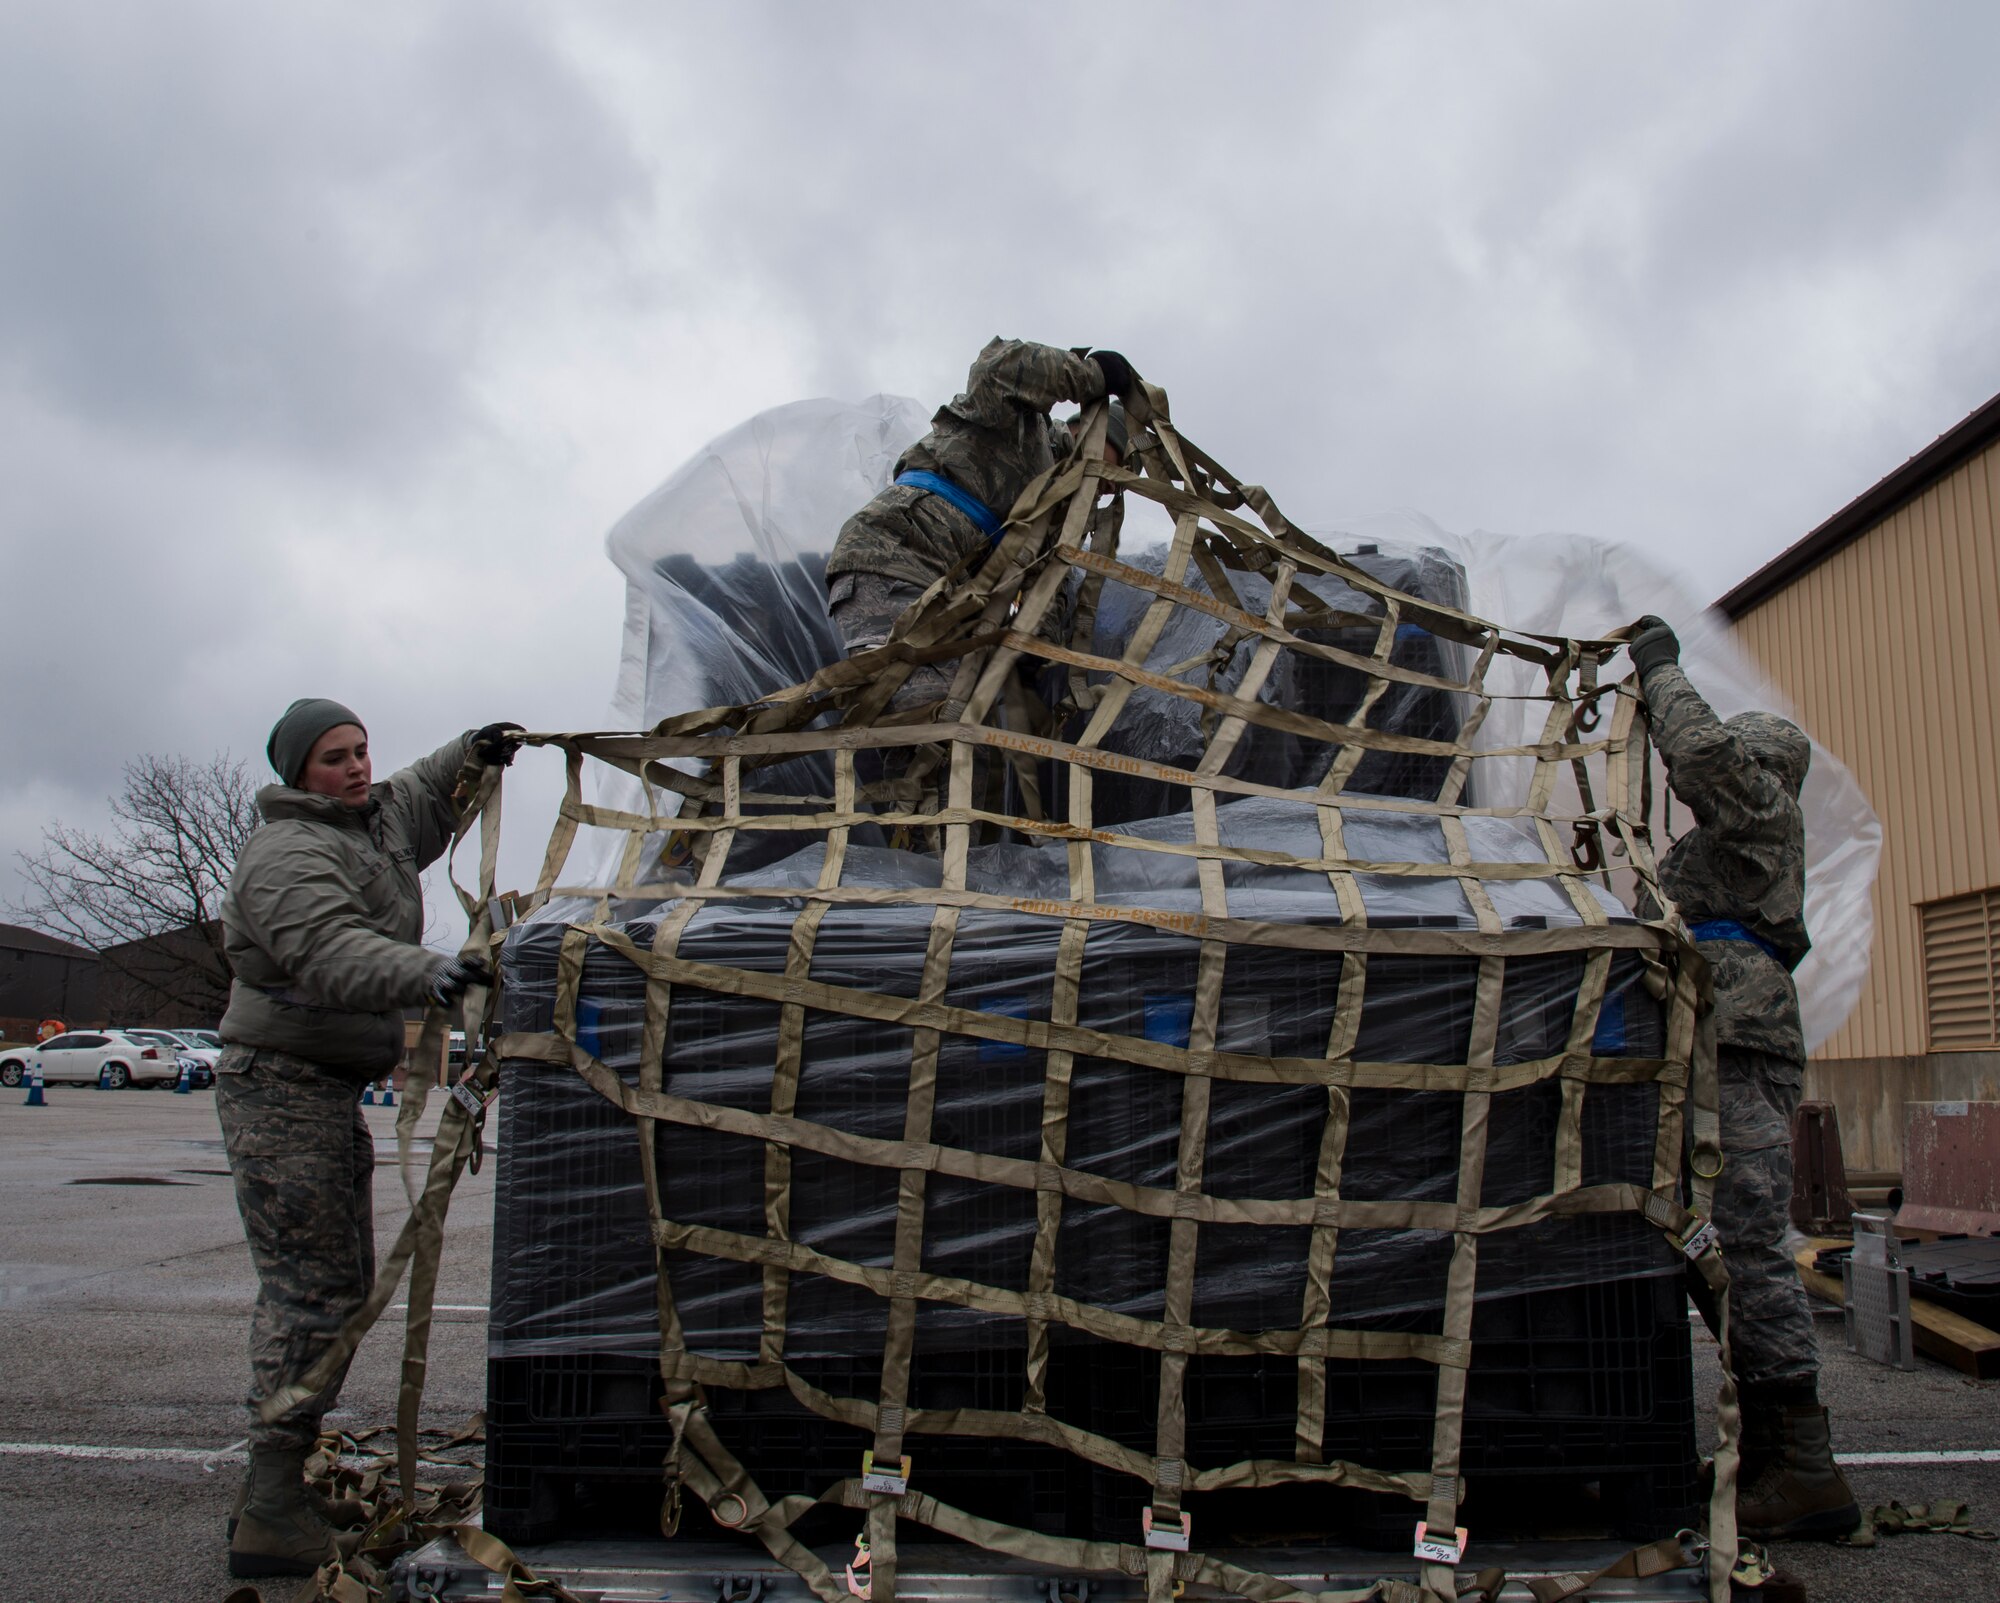 Airman 1st Class Emily Otten, 375th Logistics Readiness Squadron vehicle operator, along with Senior Airman Van Aerrus Sanchez, 375th LRS small air terminal representative, and Airman Brandon Rose, 375th LRS vehicle operator, secure crates of deployment bags to a pallet during a base-wide mobility exercise at Scott Air Force Base, Illinois, Jan. 23, 2019. During the exercise one of the responsibilities of the 375th LRS is assembling all the required equipment for the simulated deployment and prepping it to be shipped to the deployment location.